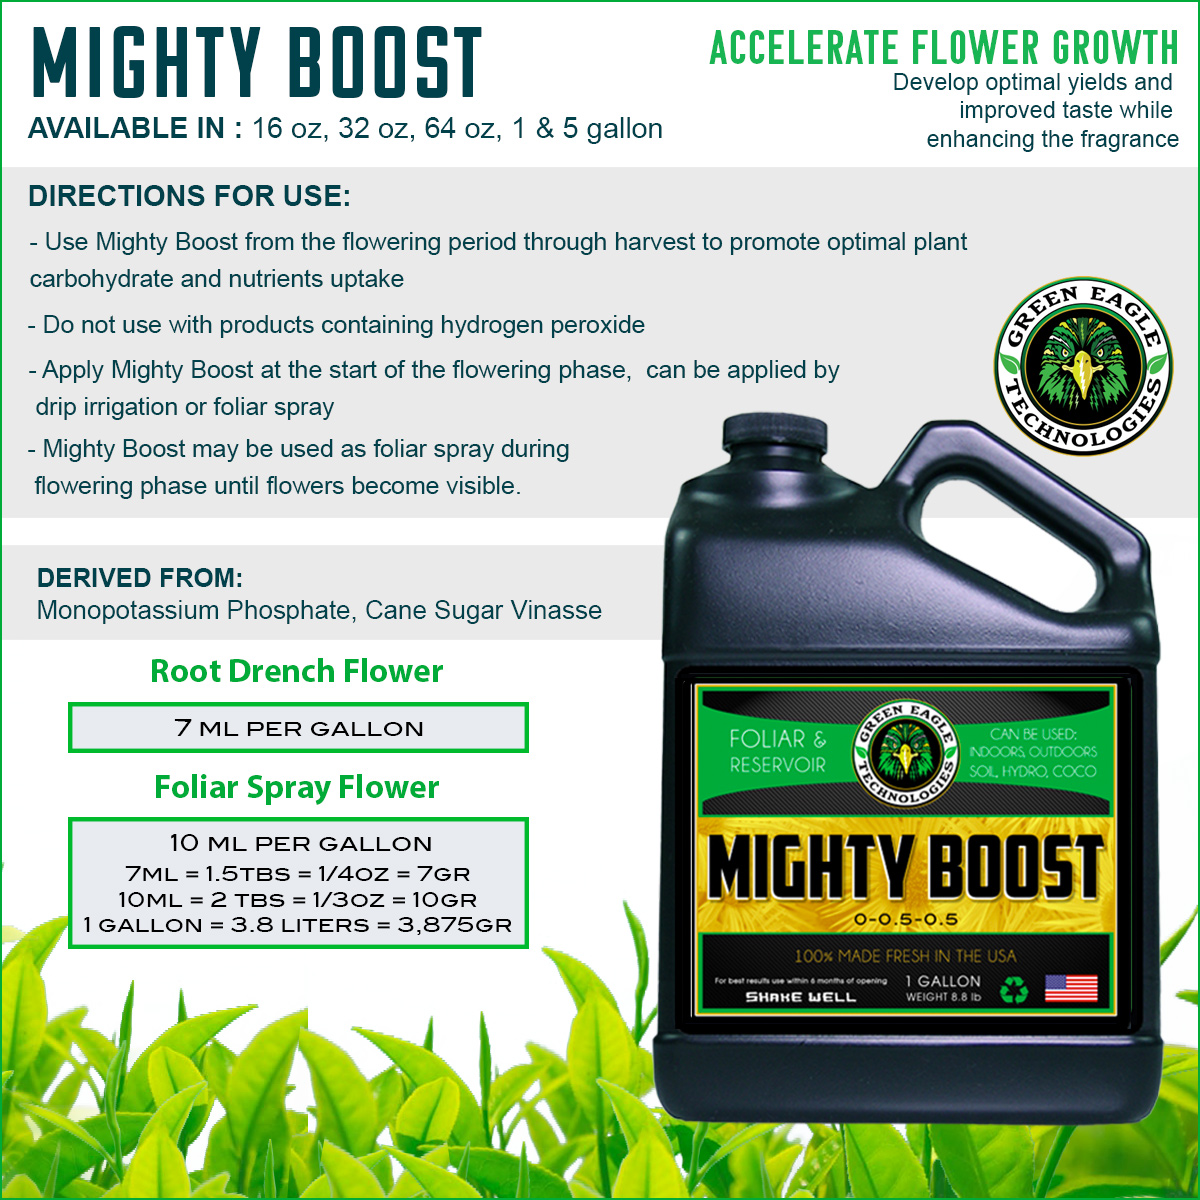 Mighty Boost Applications